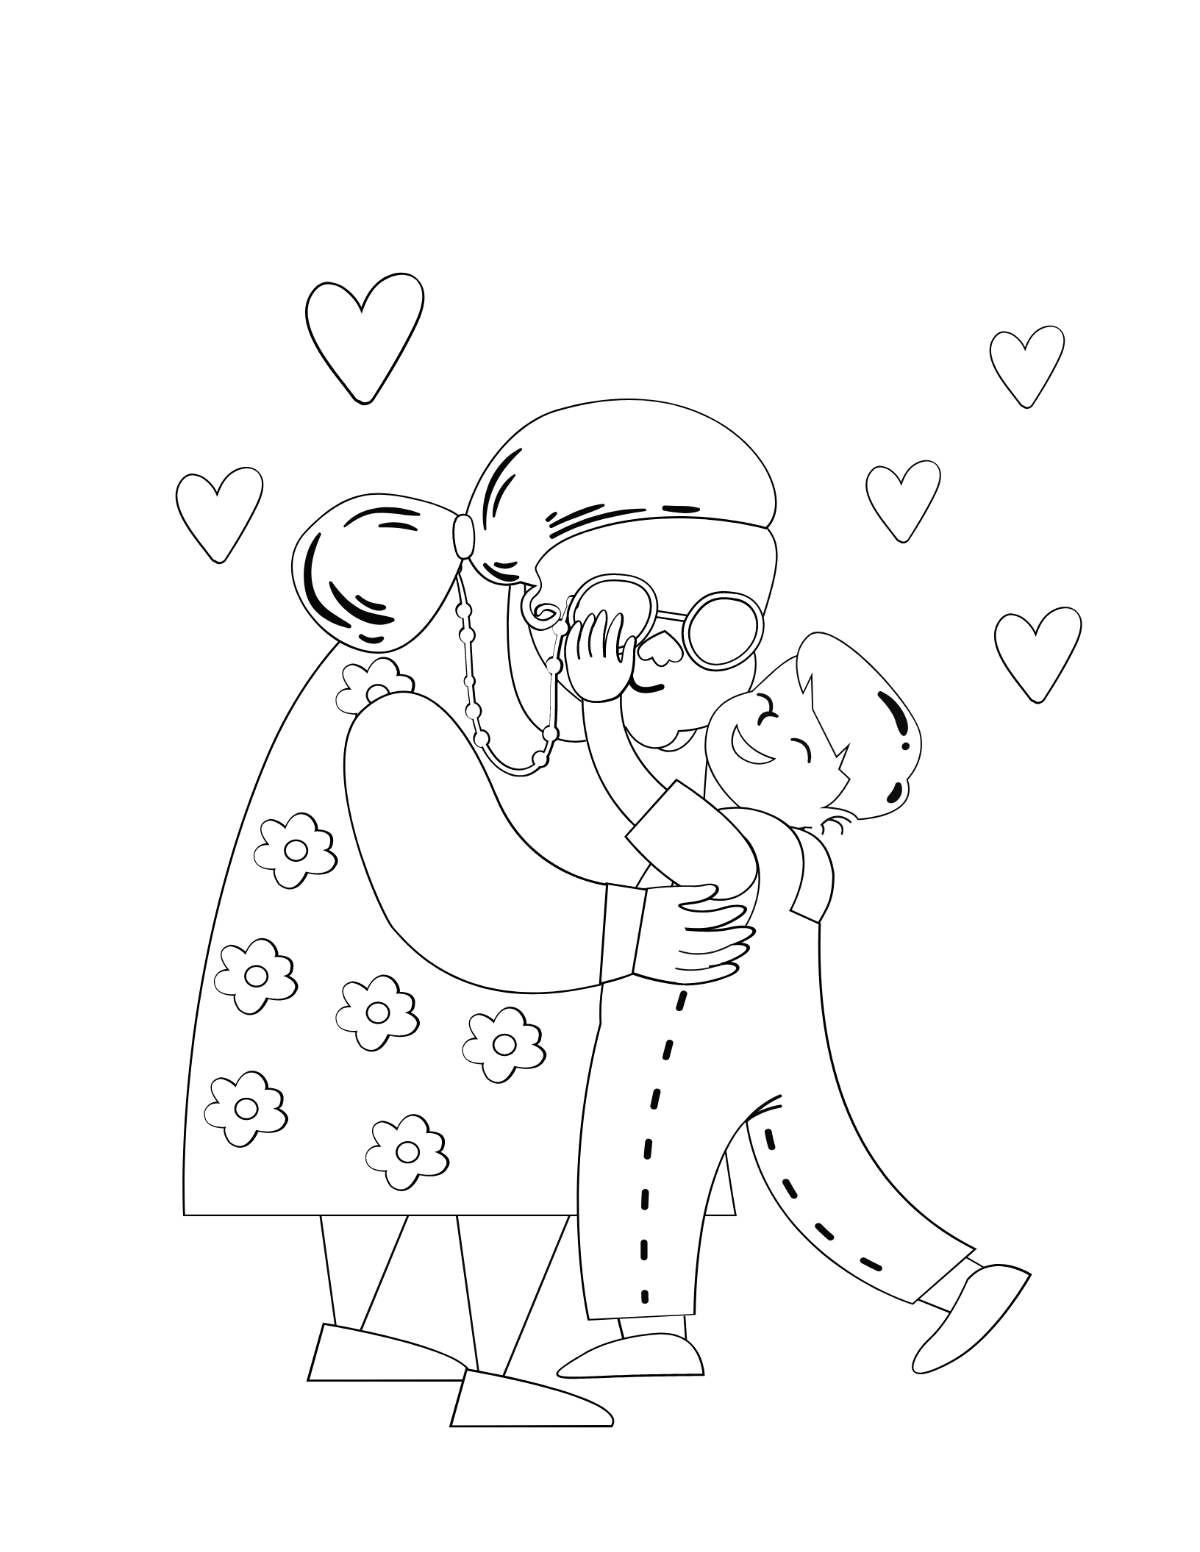 Mother's Day Coloring Page For Grandma Template